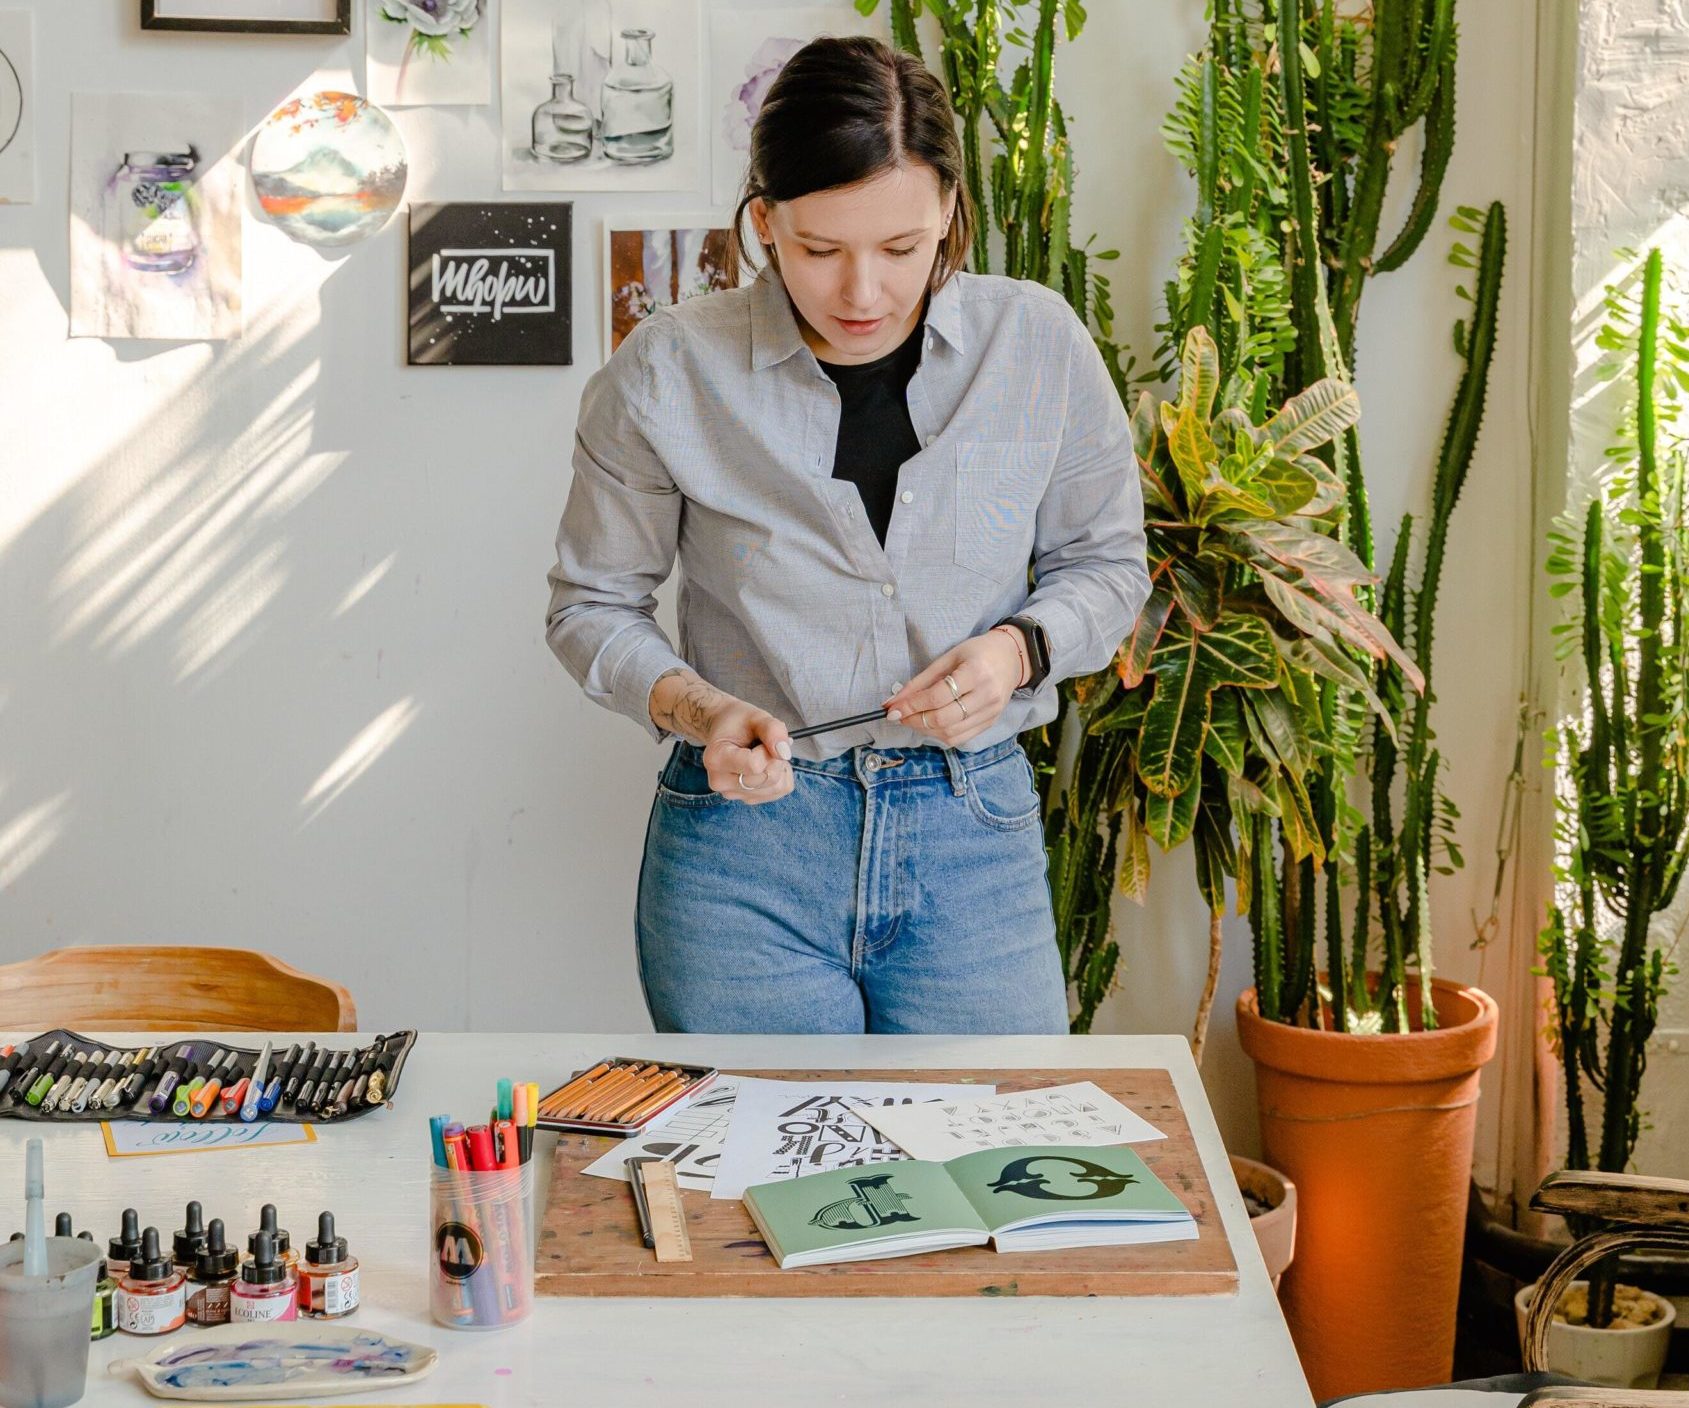 Start an Etsy business | Quotable Magazine